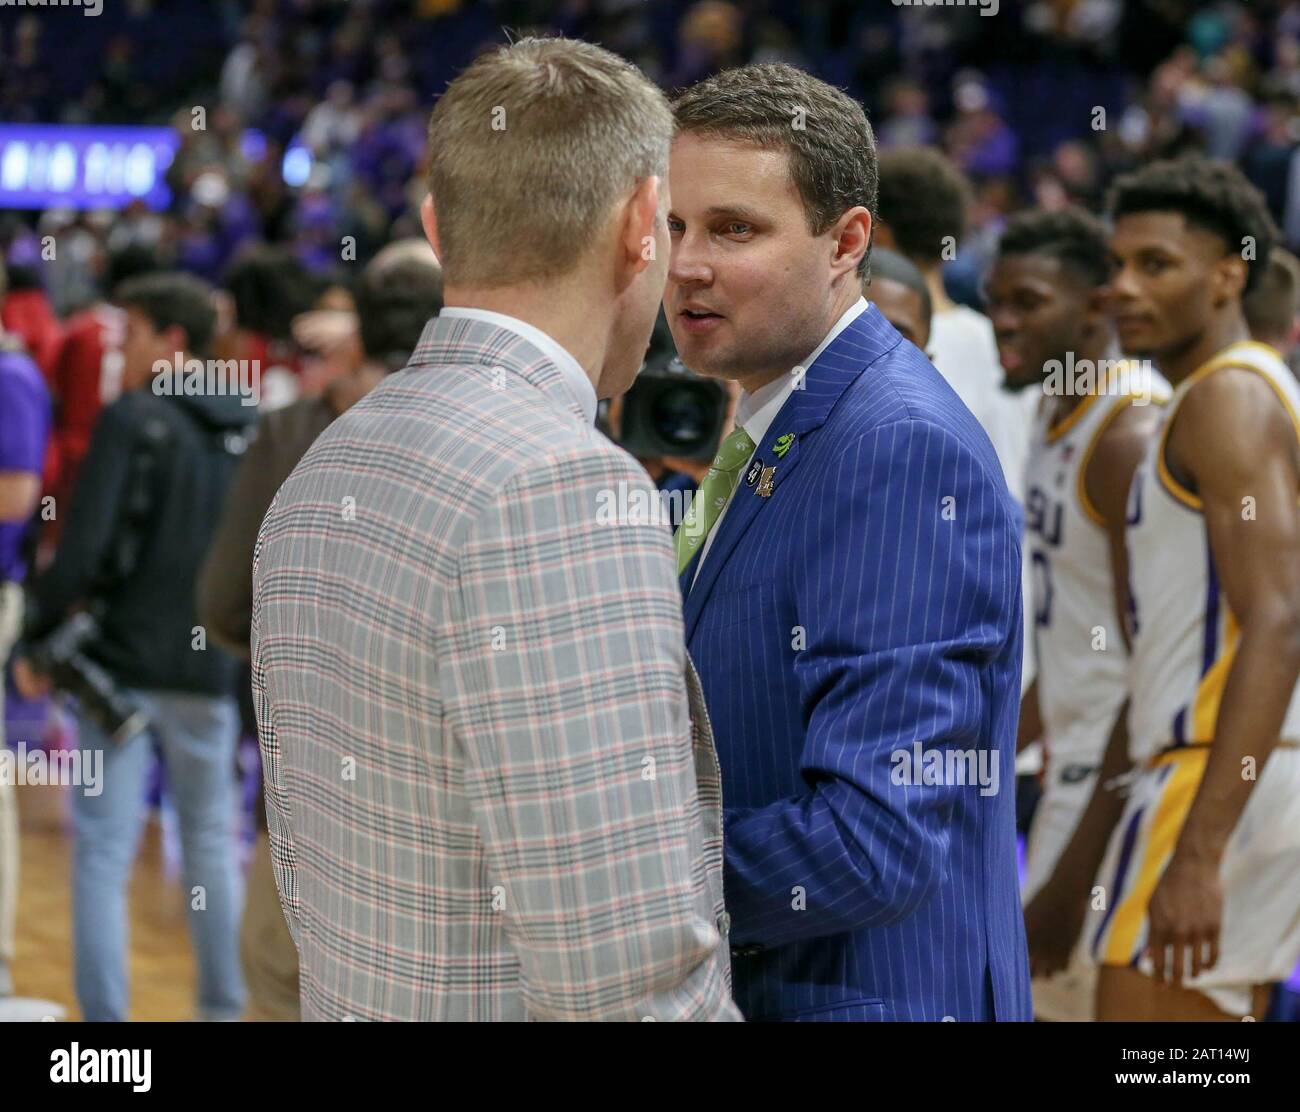 Baton Rouge, LA, USA. 29th Jan, 2020. LSU Head Coach Will Wade speaks with Alabama's Head Coach Nate Oats after NCAA Basketball action between the Alabama Crimson Tide and the LSU Tigers at the Pete Maravich Assembly Center in Baton Rouge, LA. Jonathan Mailhes/CSM/Alamy Live News Stock Photo